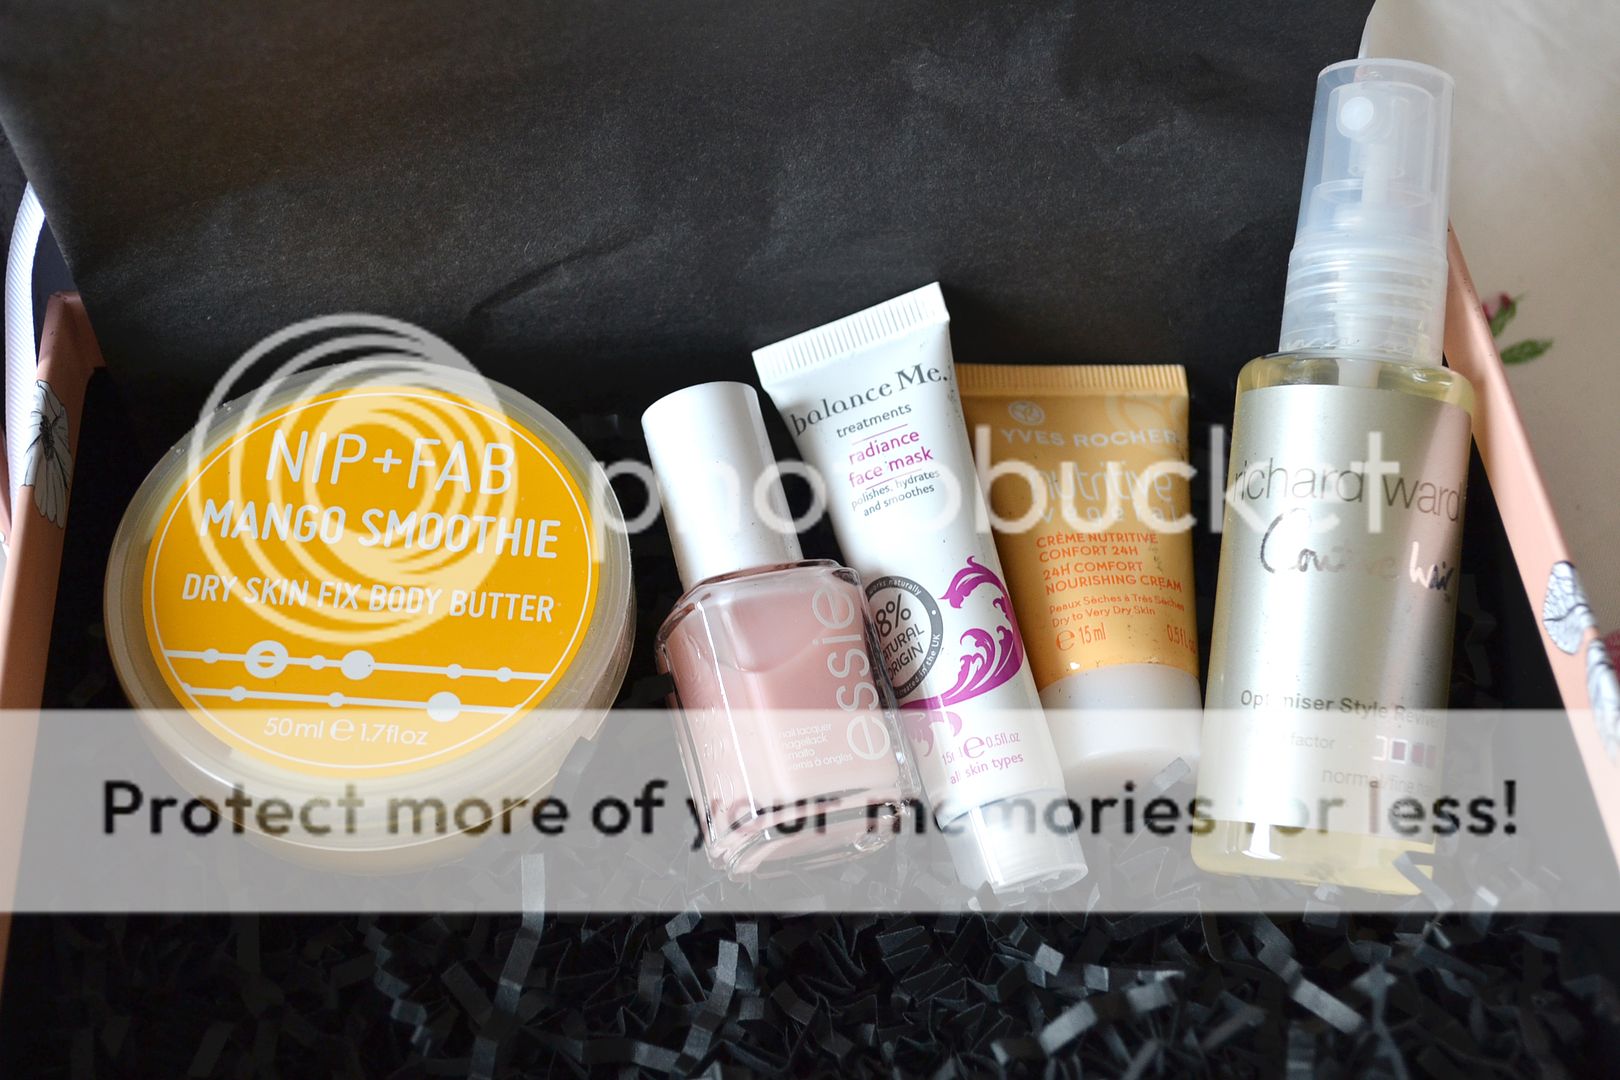  photo Whats_inside_glossybox_april_2013_zps4969cabe.jpg